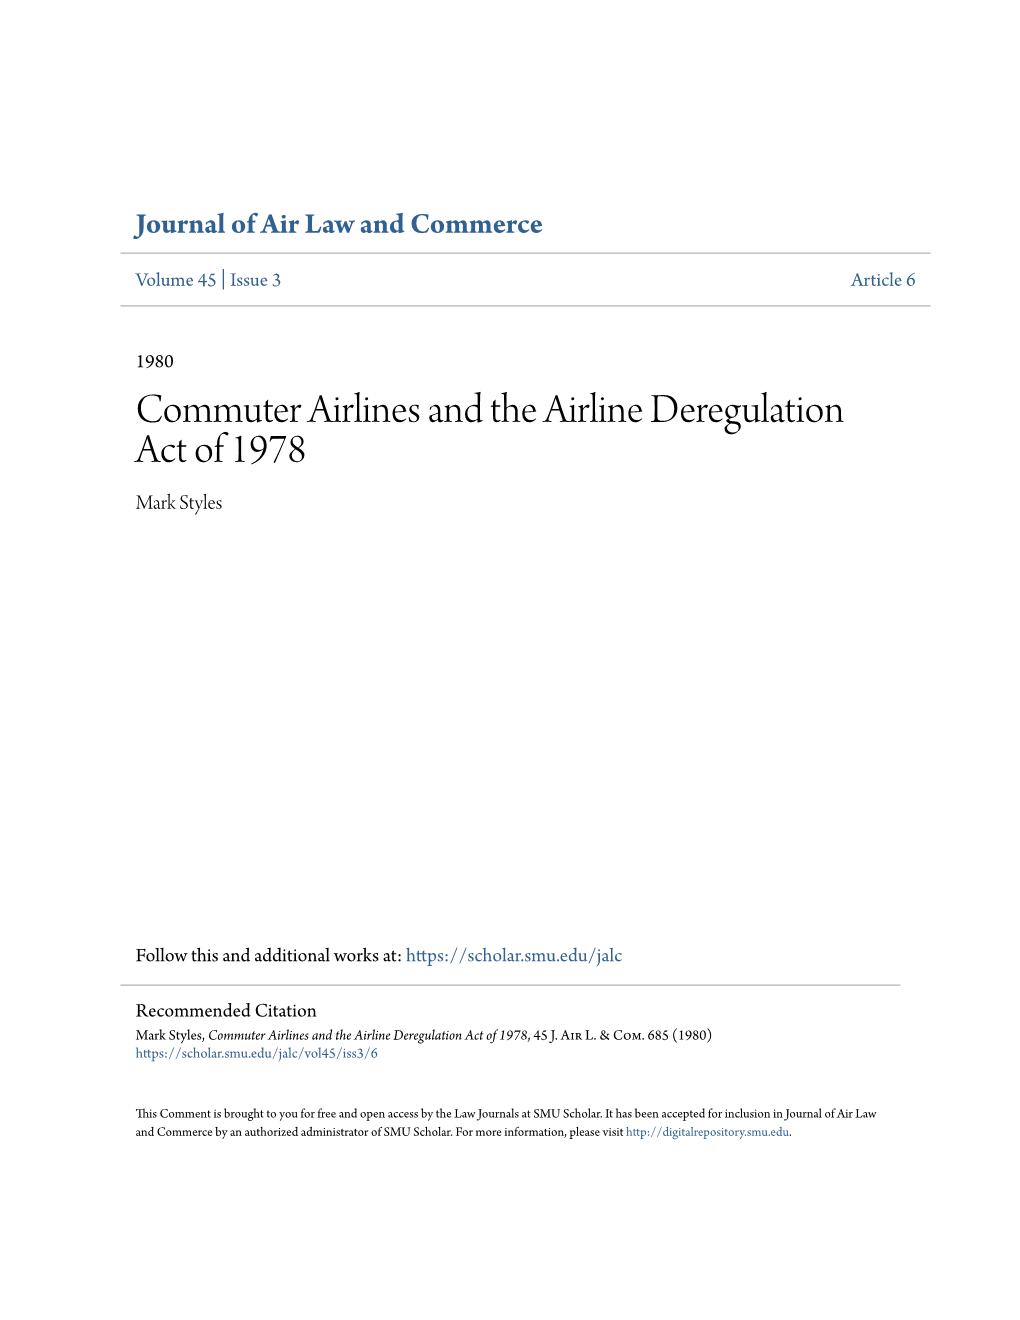 Commuter Airlines and the Airline Deregulation Act of 1978 Mark Styles